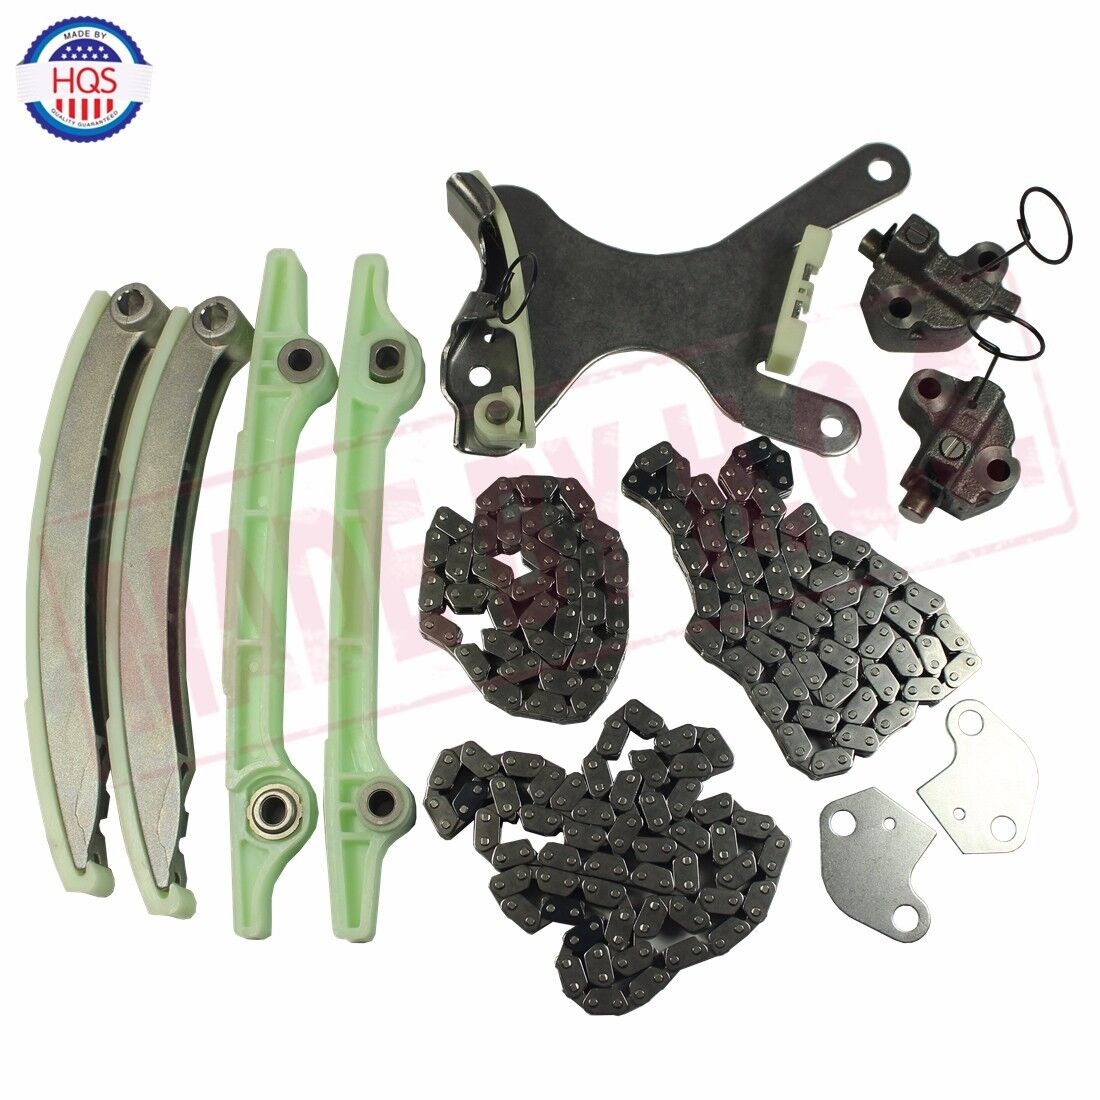 Timing Chain Kit w/o gears Fits For 99-08 Jeep Commander Dodge Durango Ram 4.7L